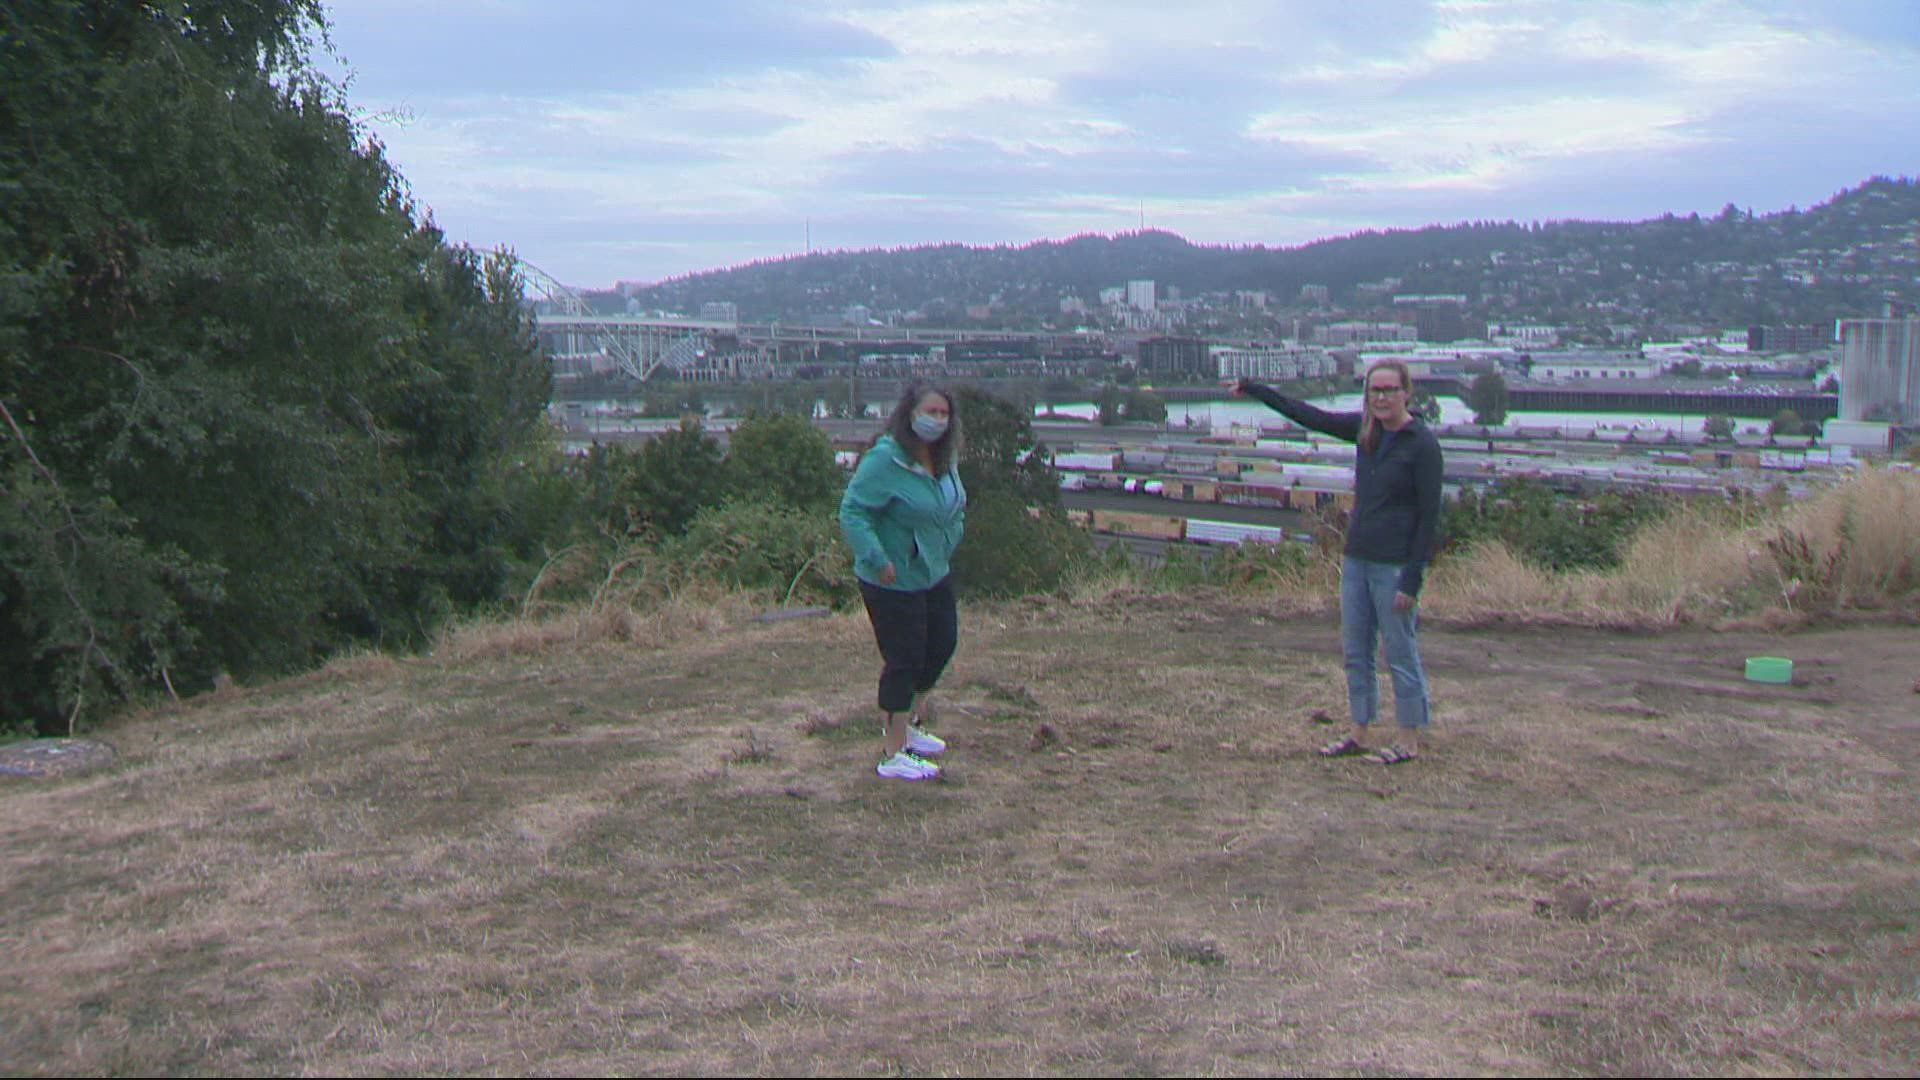 Neighbors tell KGW they believe the fires are starting at a nearby homeless camp.